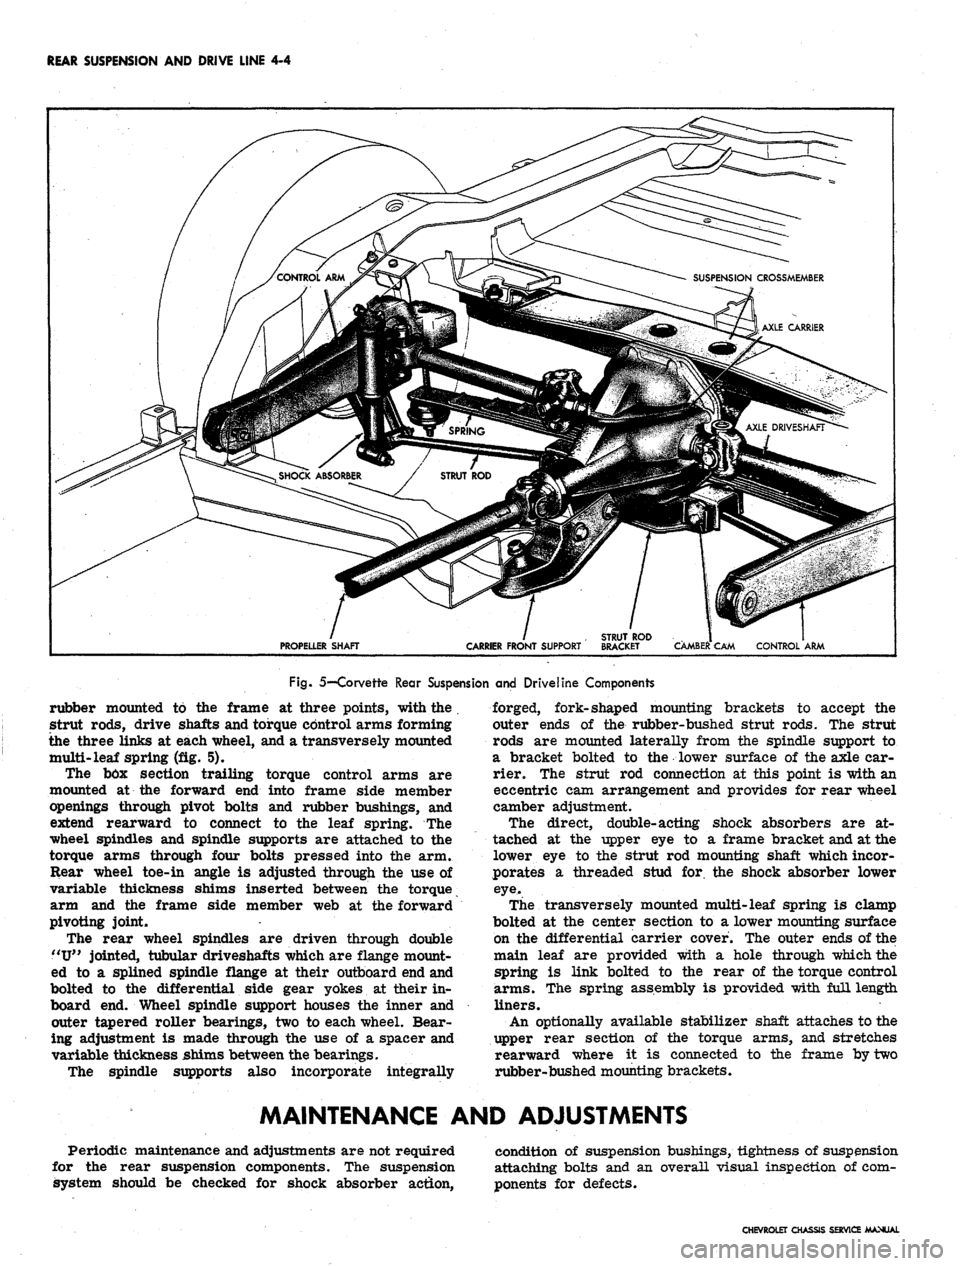 CHEVROLET CAMARO 1967 1.G Chassis Workshop Manual 
REAR SUSPENSION AND DRIVE LINE
 4-4

PROPELLER SHAFT

CARRIER FRONT SUPPORT 
CAMBER CAM CONTROL ARM

Fig. 5—Corvette Rear Suspension and Driveline Components

rubber mounted to the frame at three p